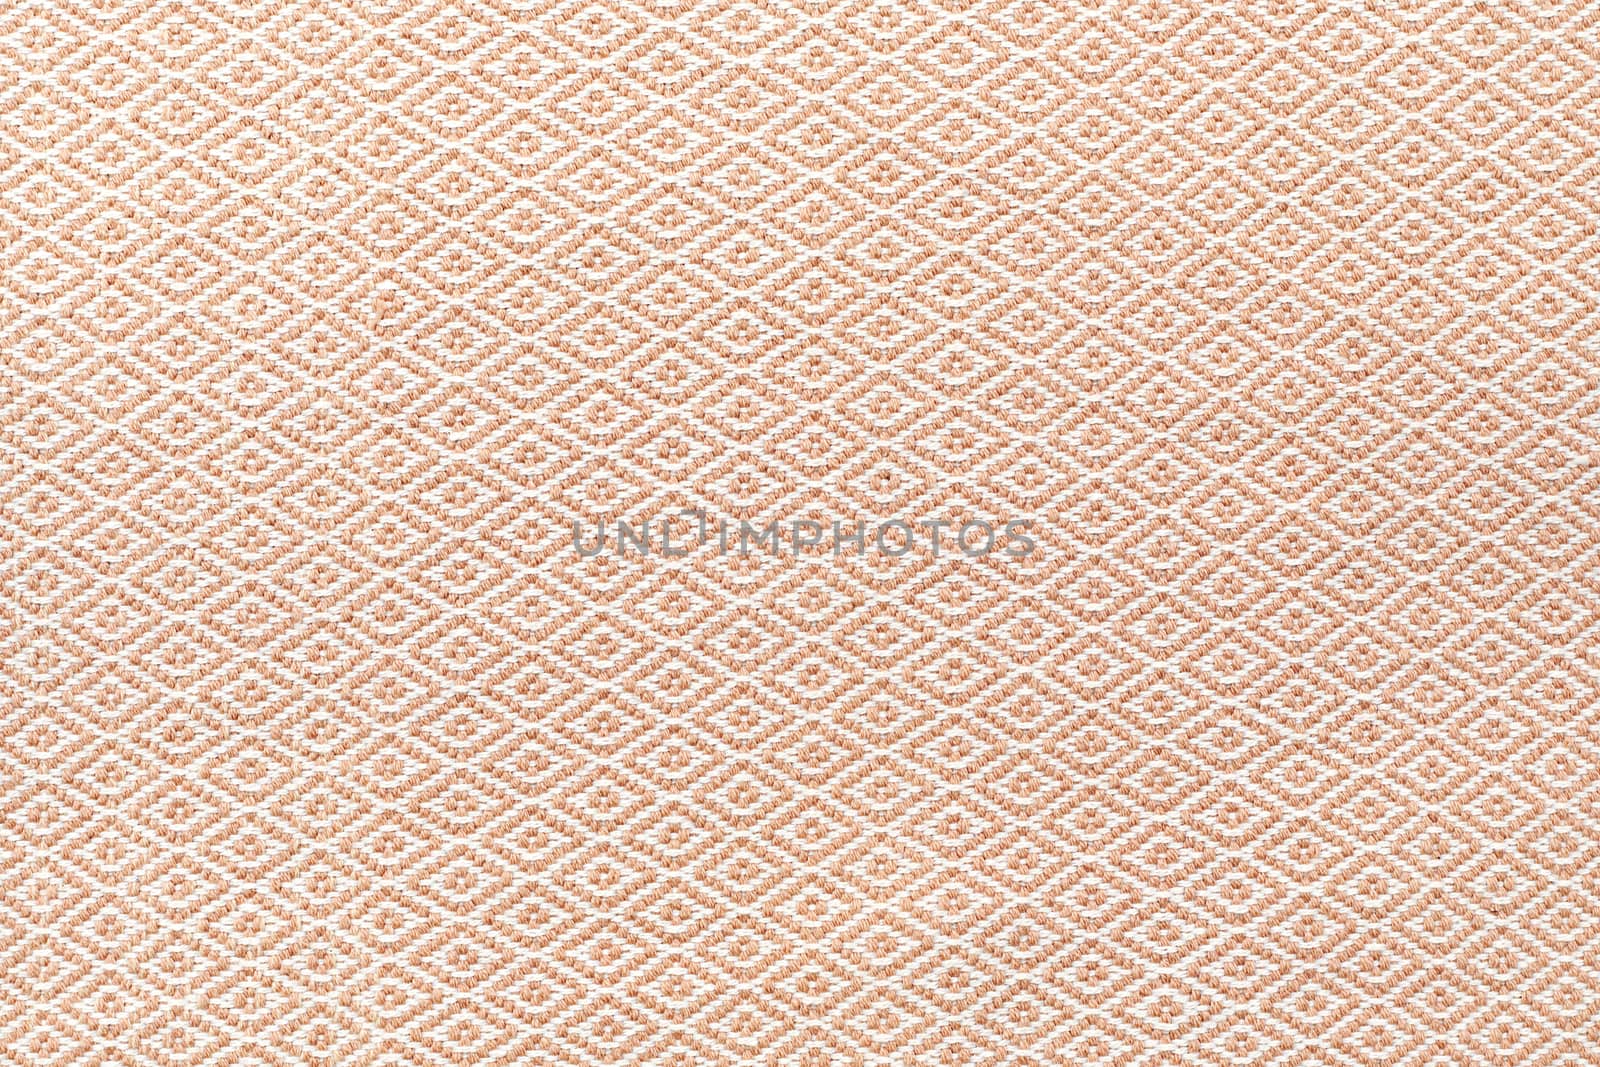 Brown lace fabric silk background texture. by jayzynism